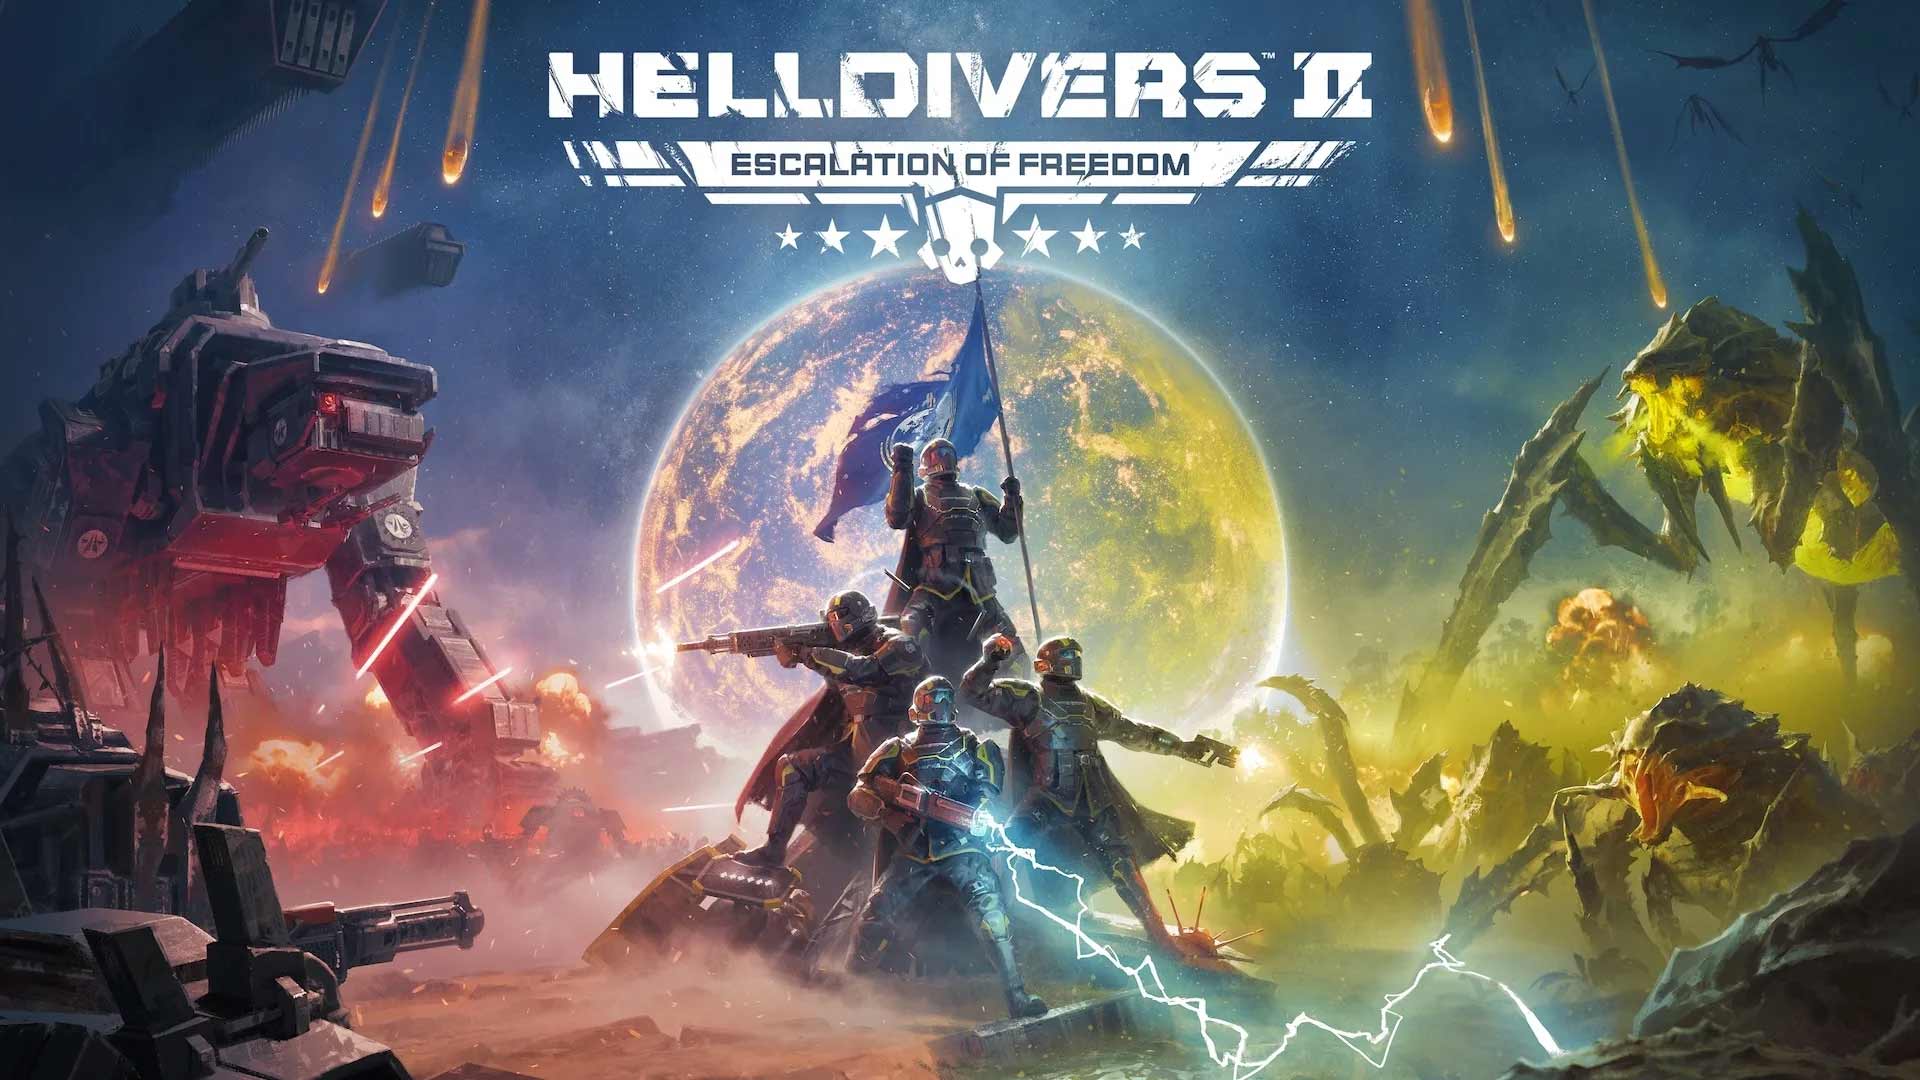 Helldivers 2: Escalation of Freedom launches on August 6